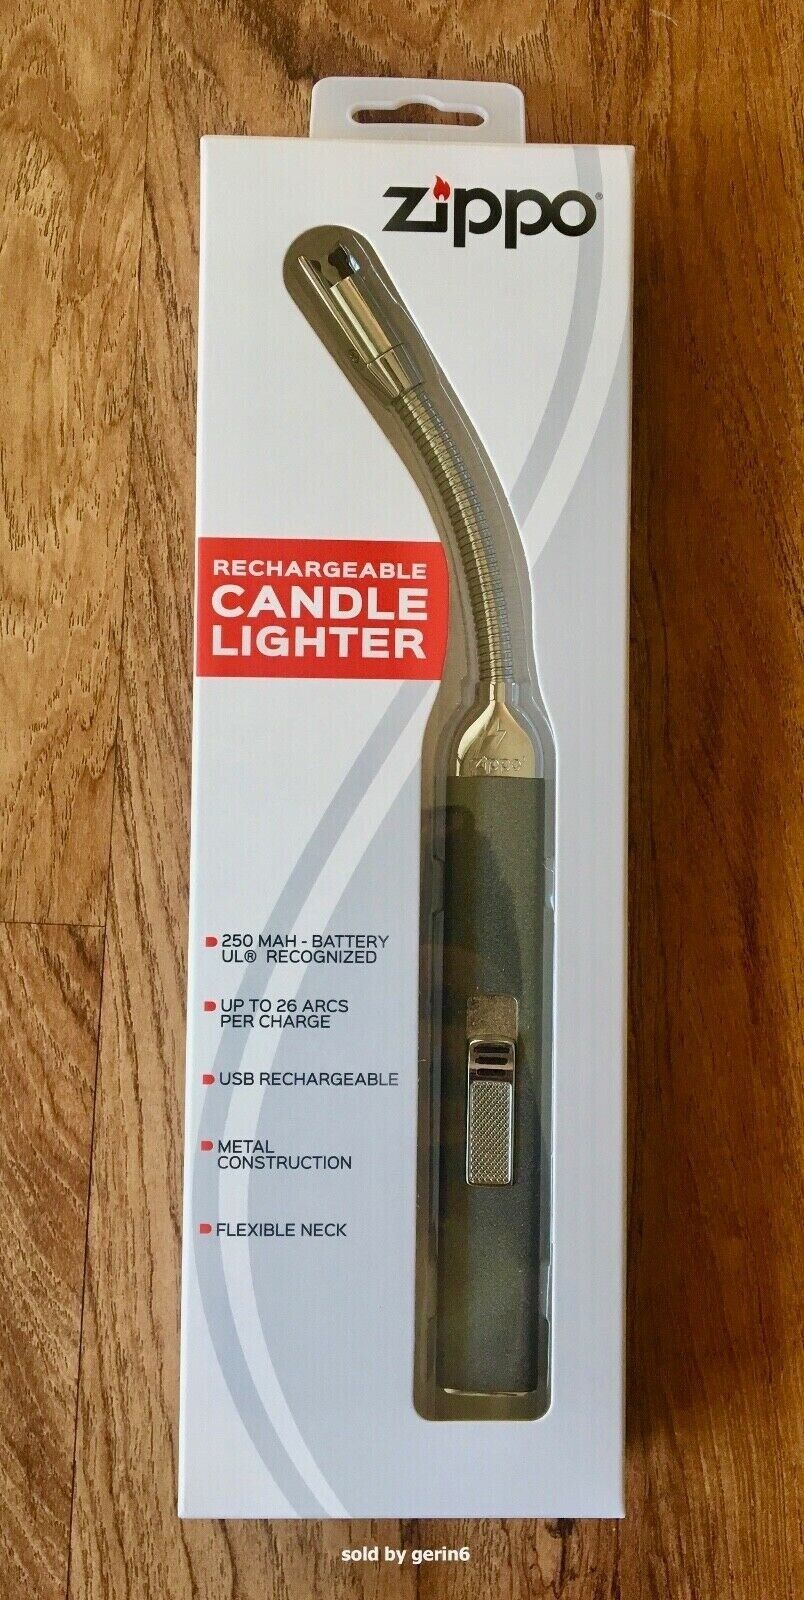 Zippo Rechargeable Candle Lighter 121650 (pebble)